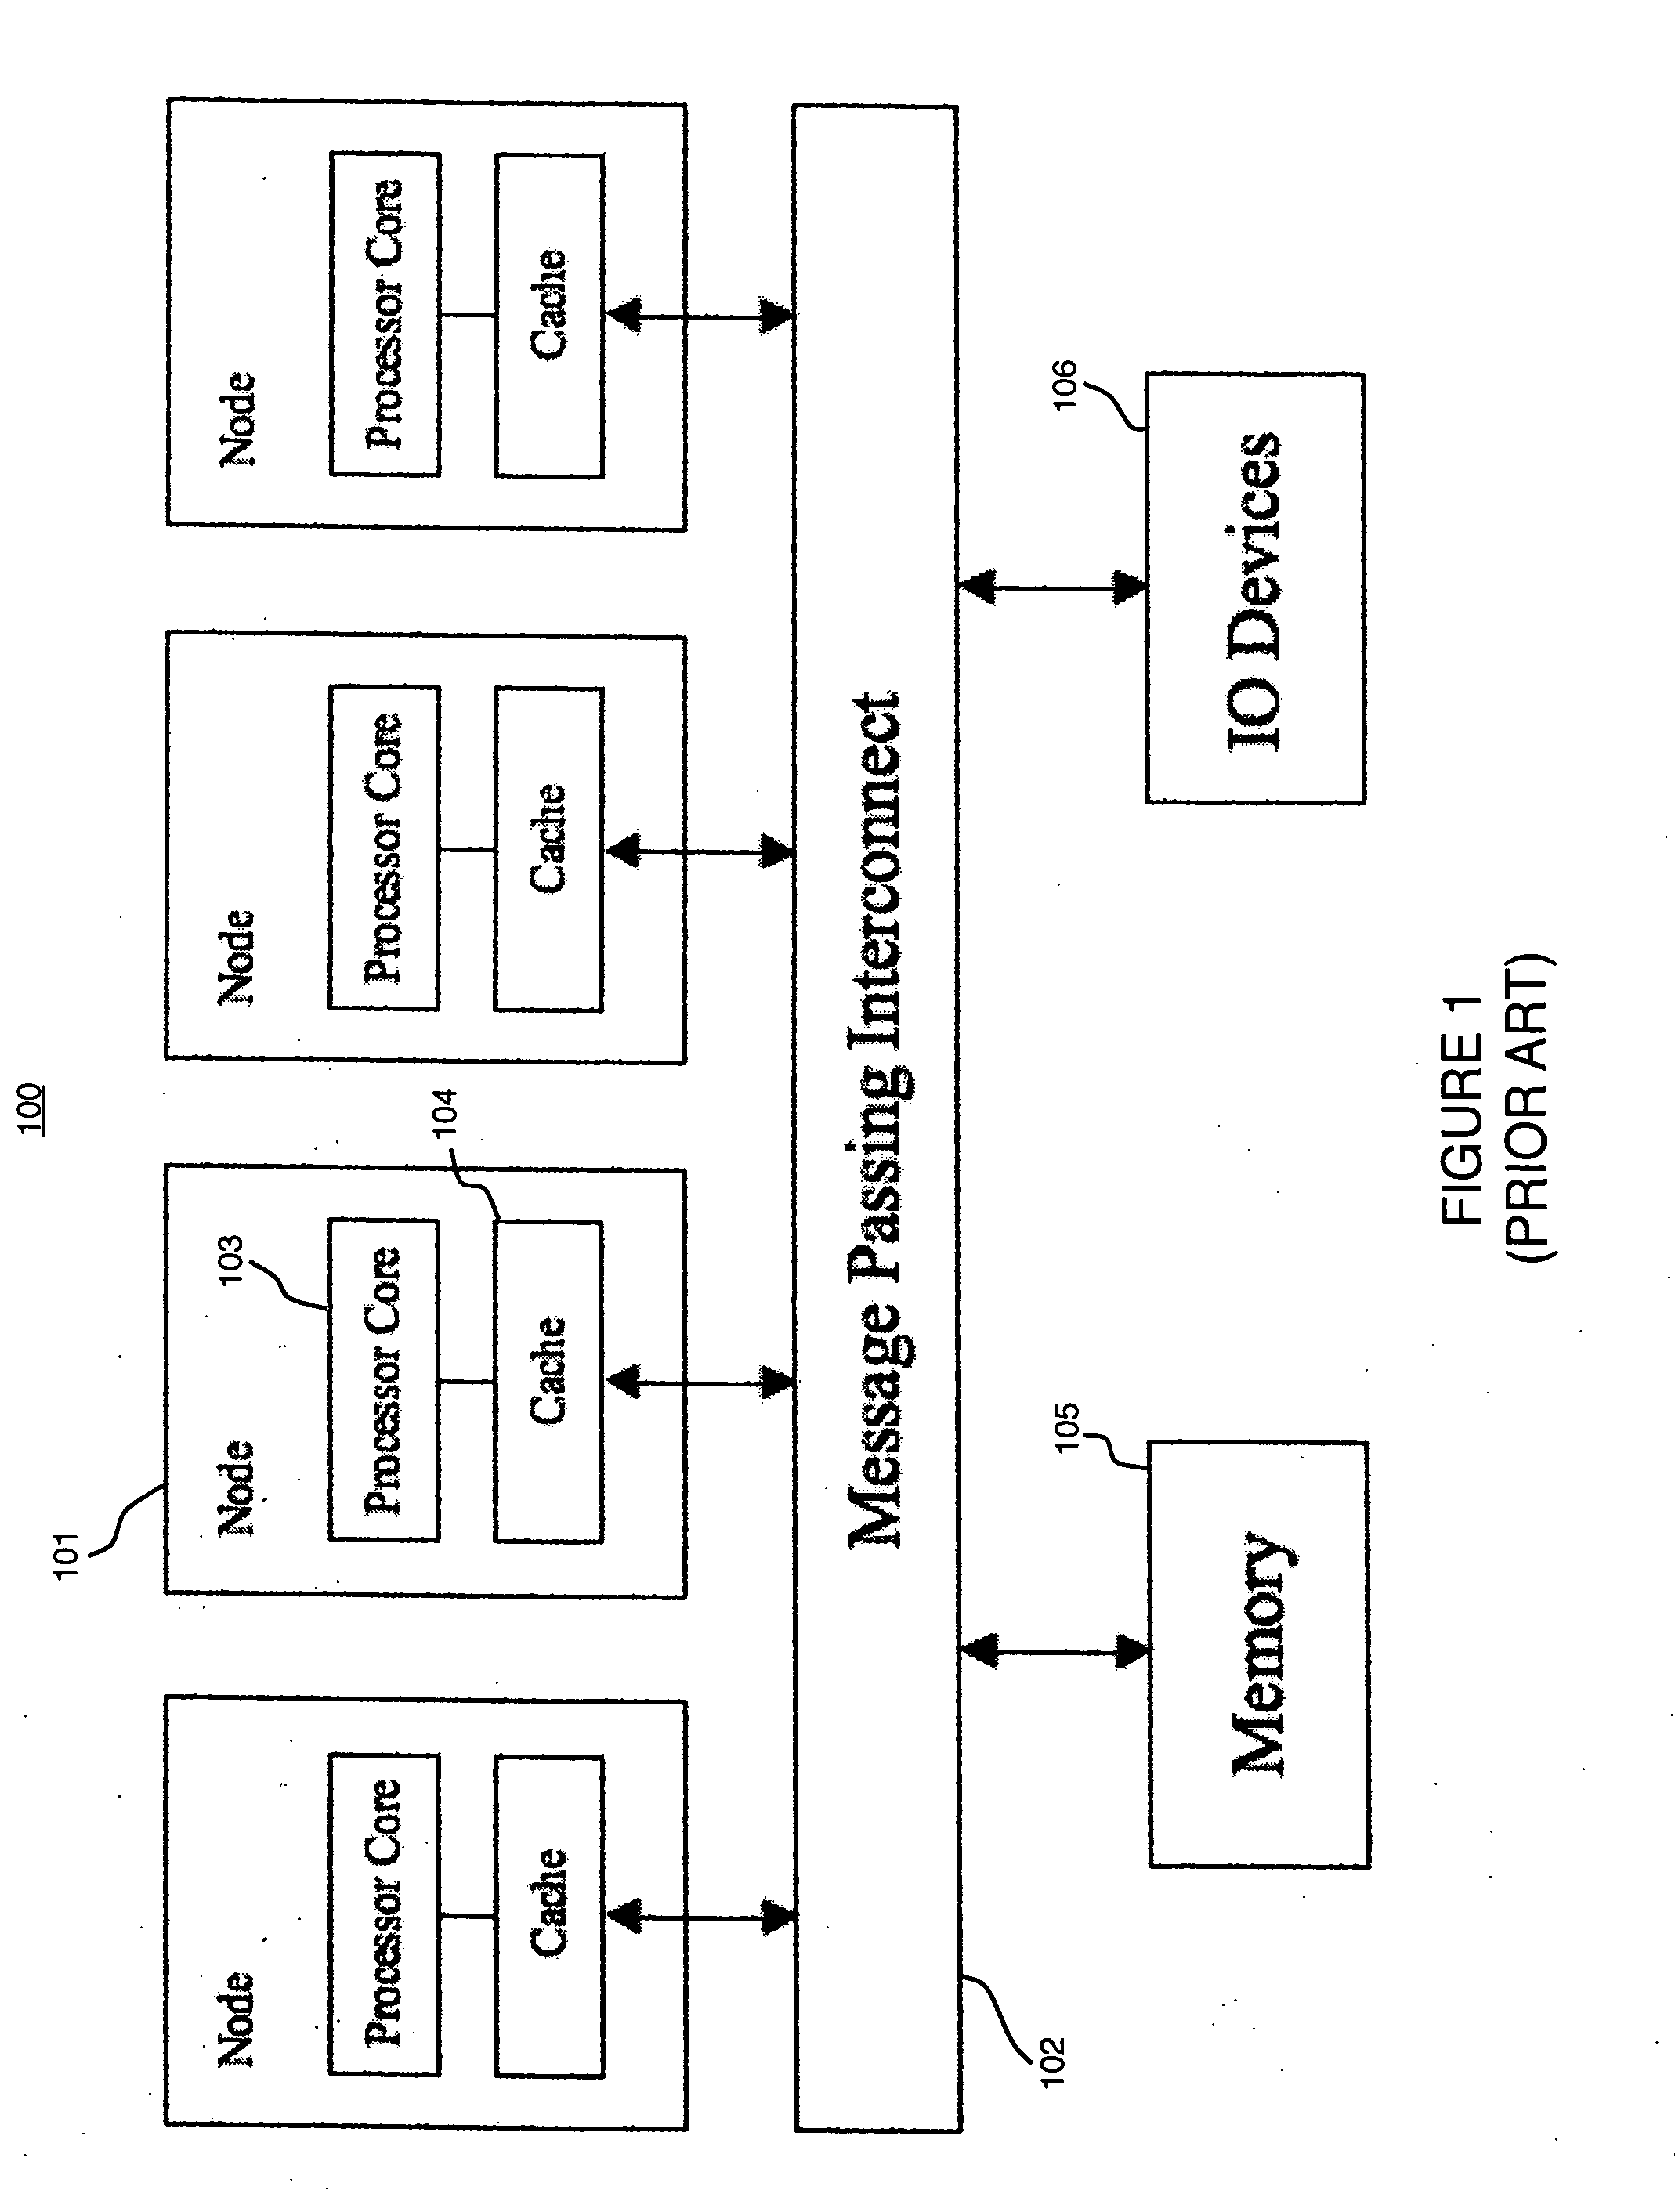 Mechanisms and methods of using self-reconciled data to reduce cache coherence overhead in multiprocessor systems